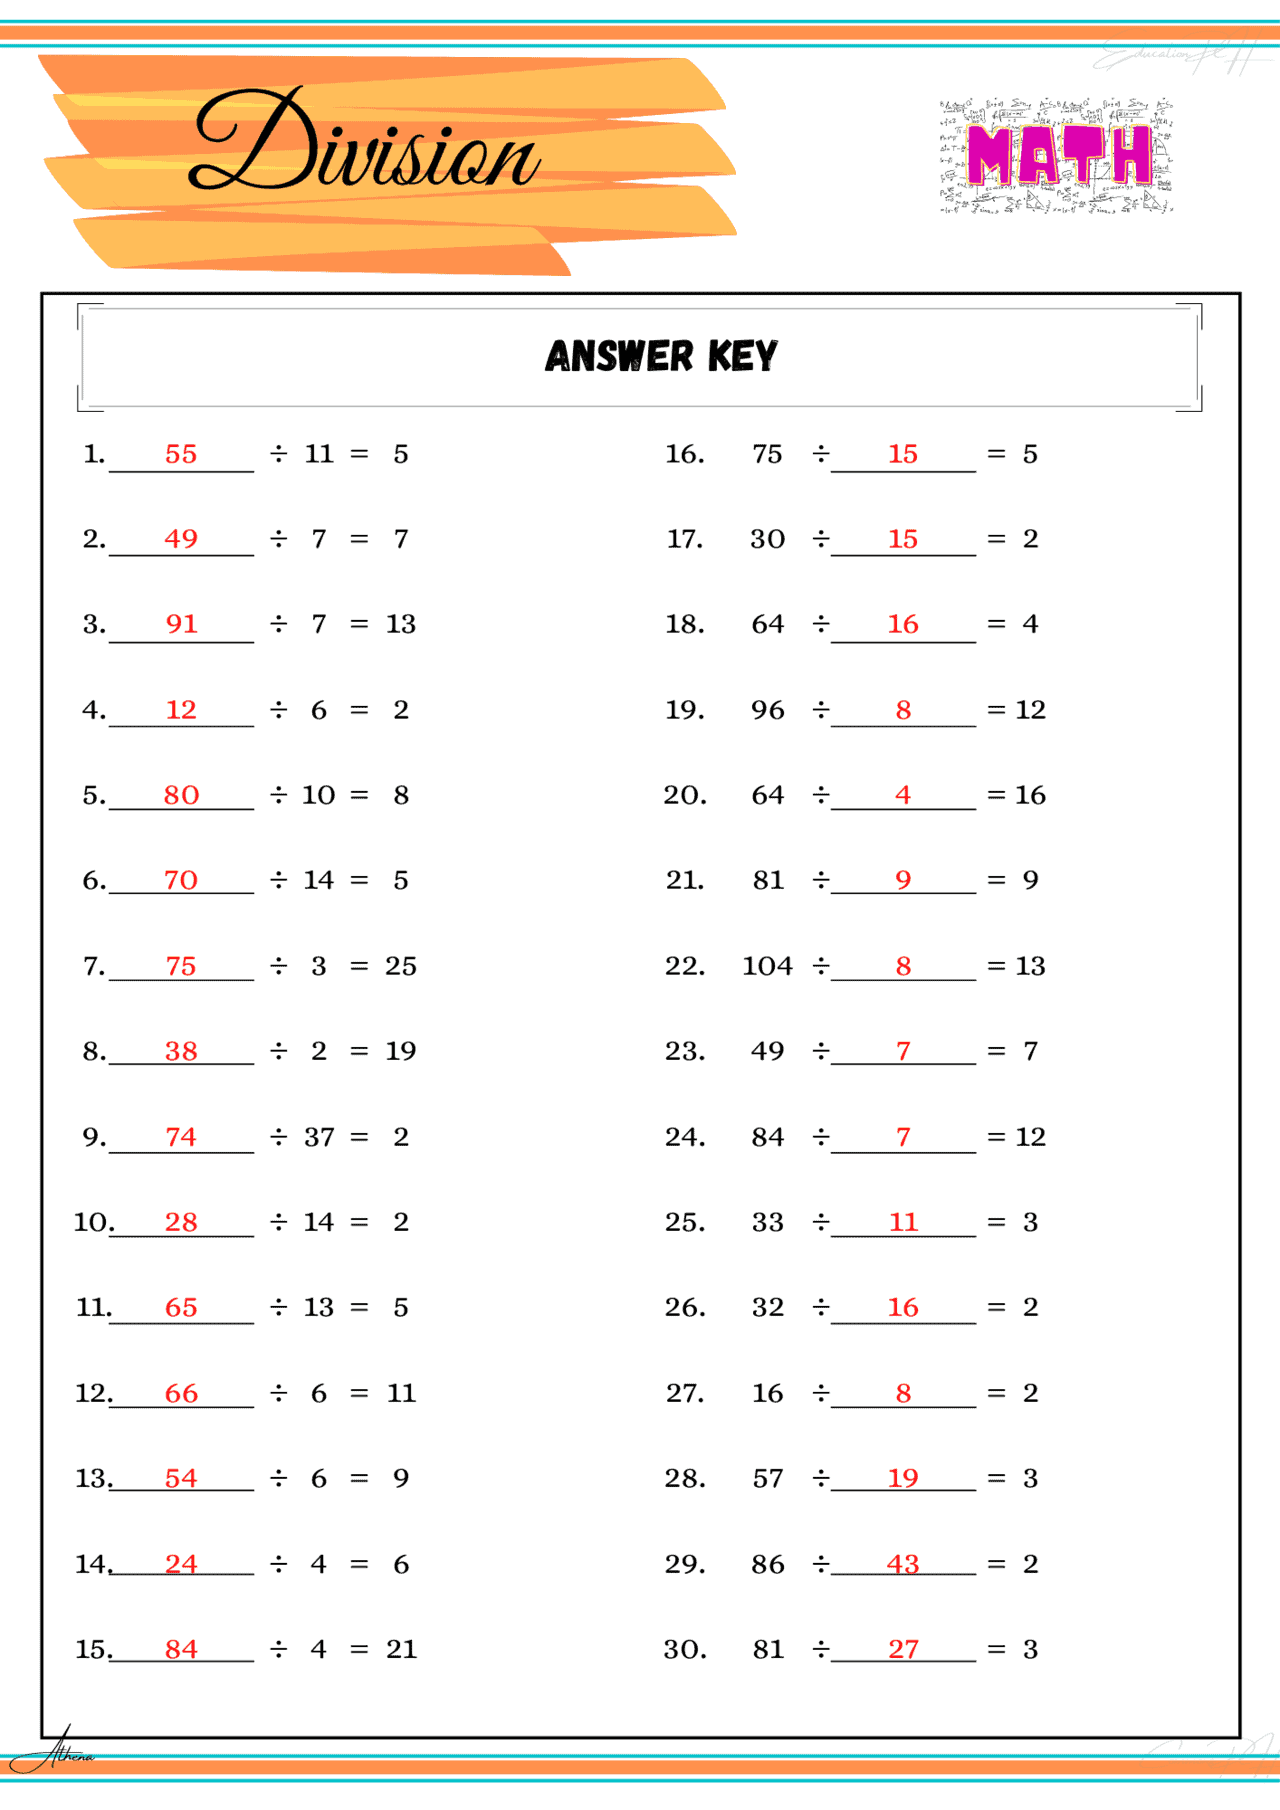 Worksheet For Class 4 Maths Division